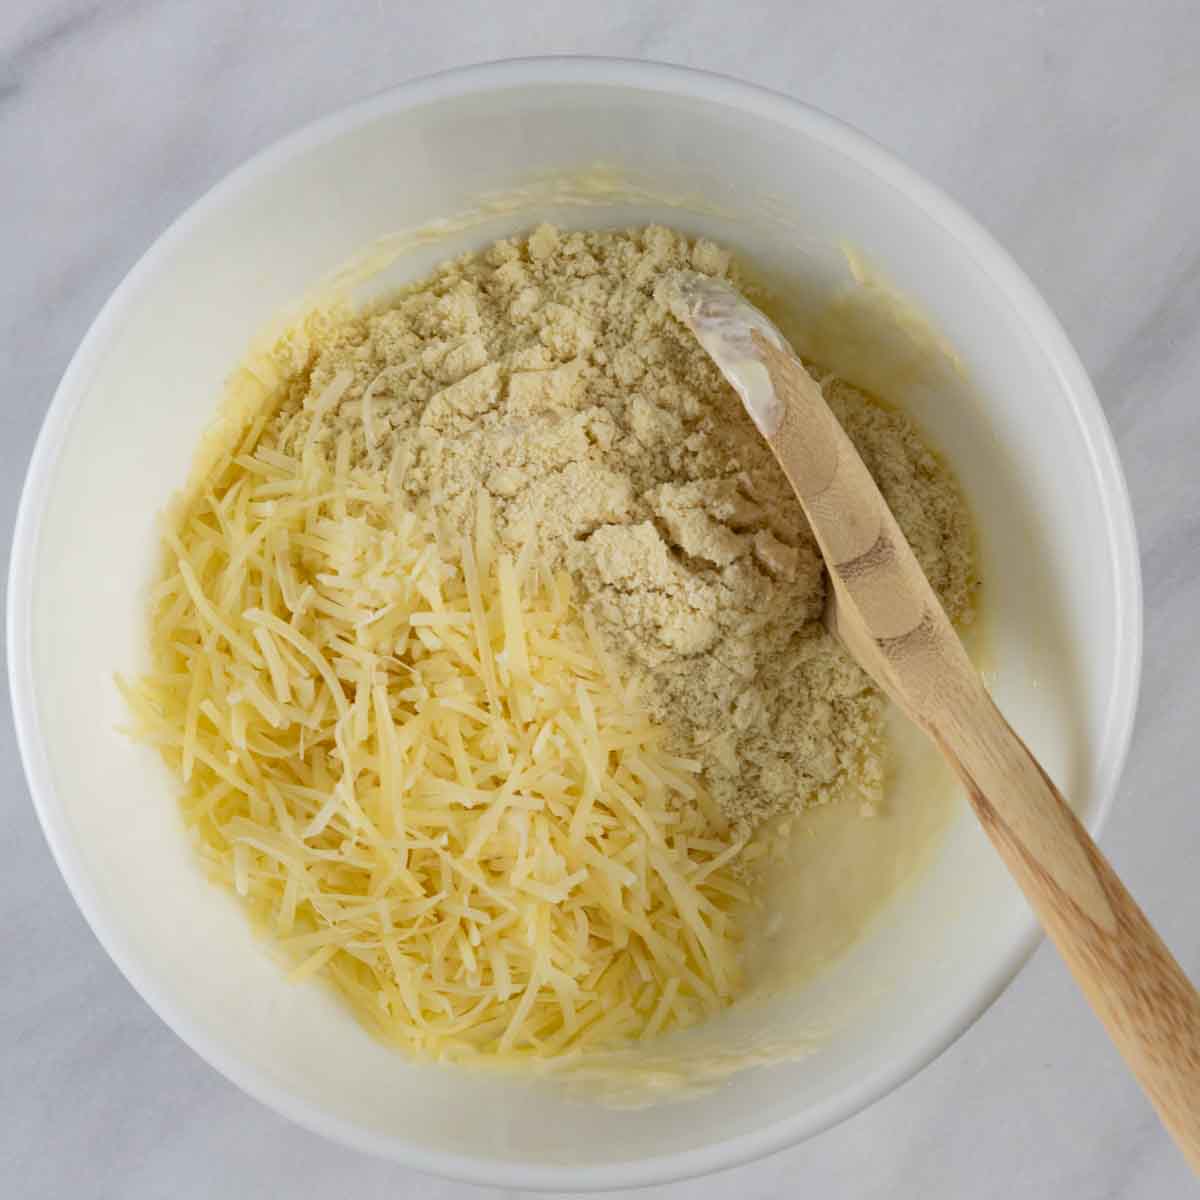 Dry ingredients, parmesan cheese in mixing bowl for qull-apart rolls.